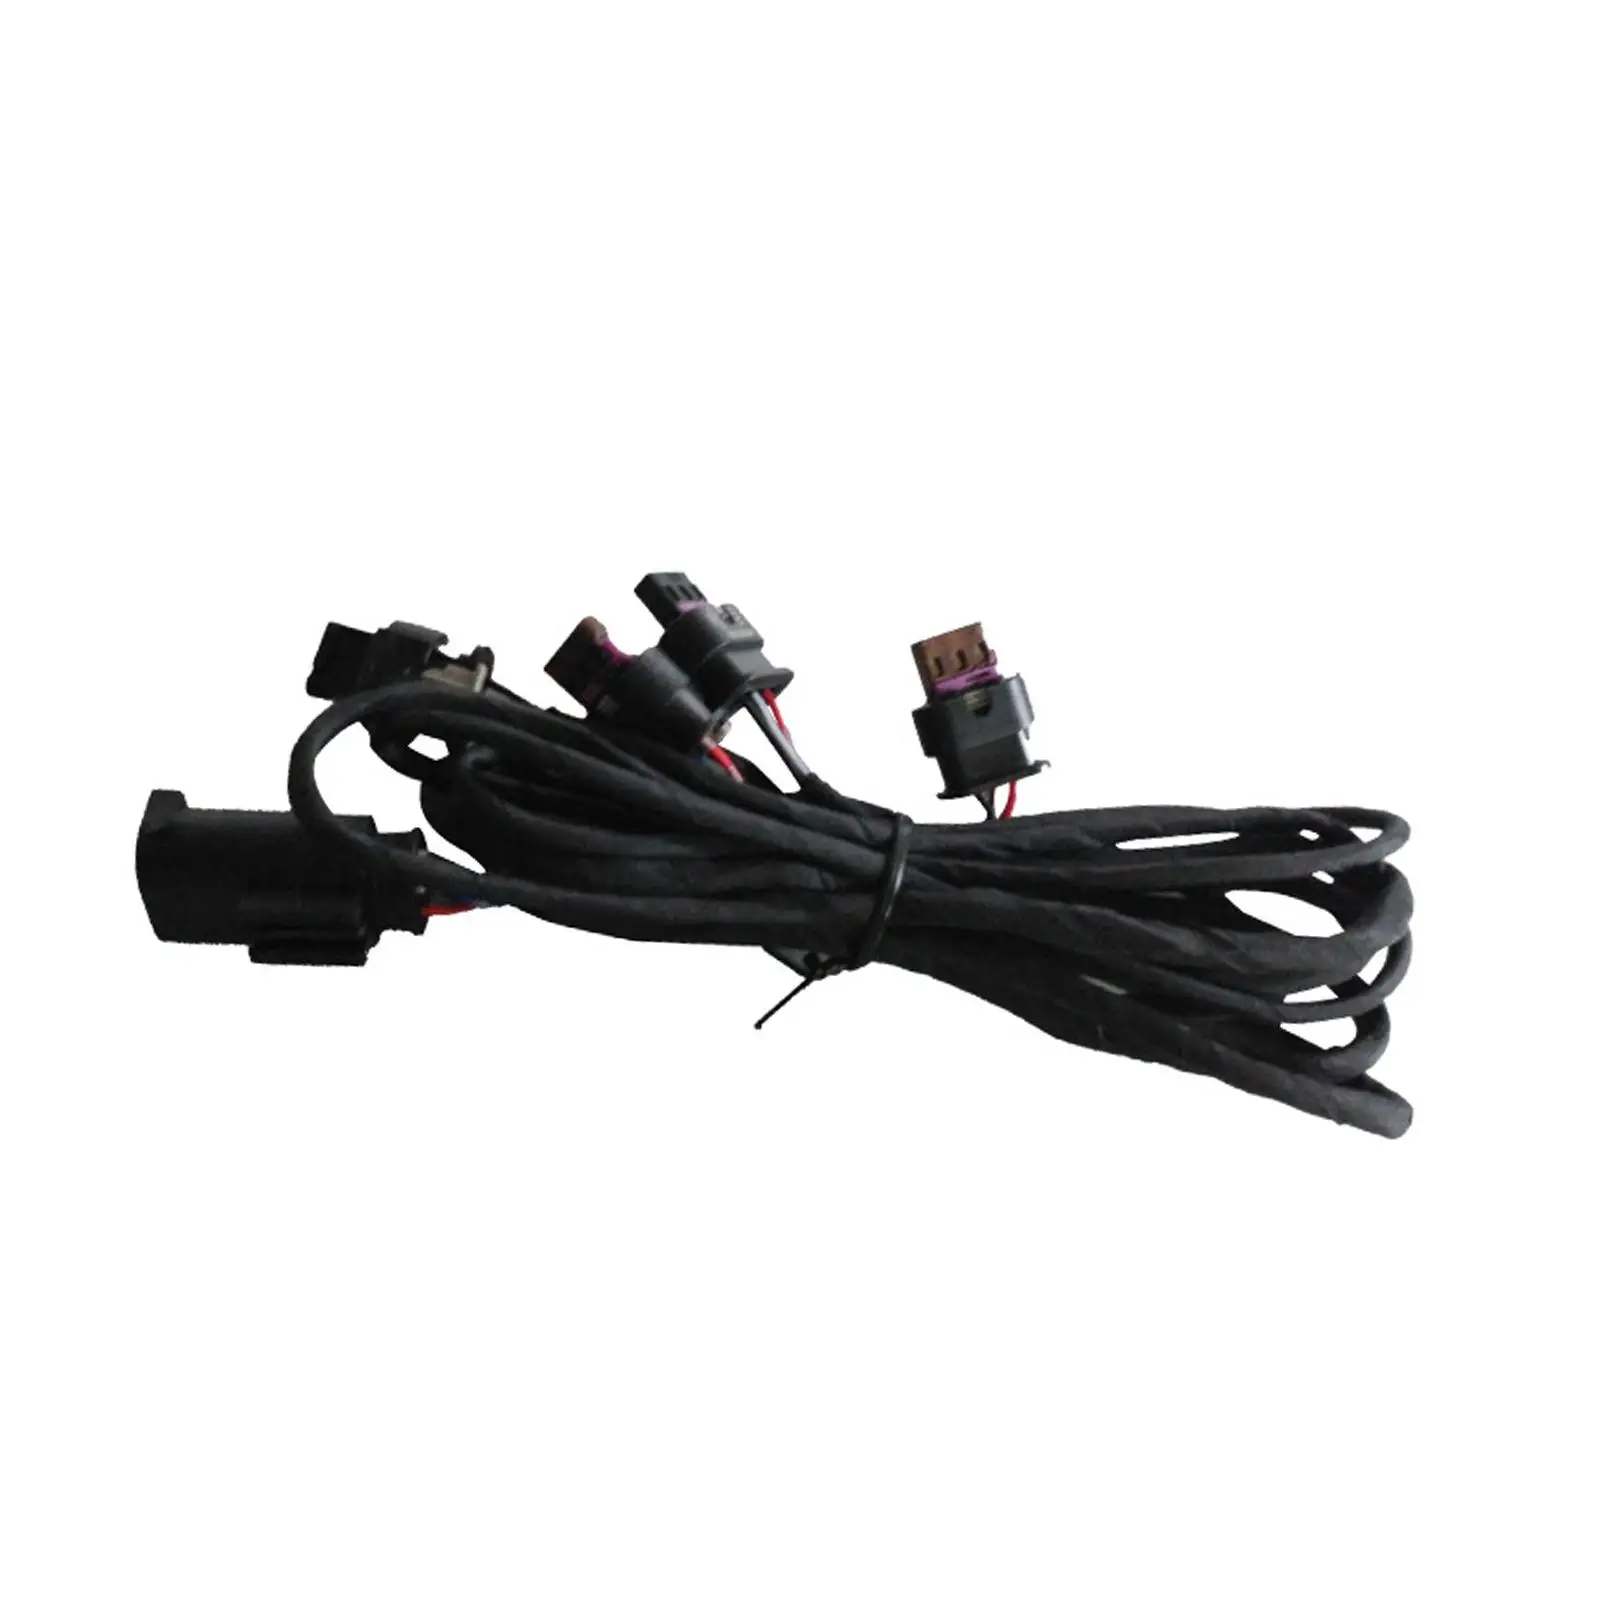 Parking Cables,Auto Accessory,Front Rear Wiring Harness Replaces for 3 Series 4 Series F80 M3 F30 Lci,Professional